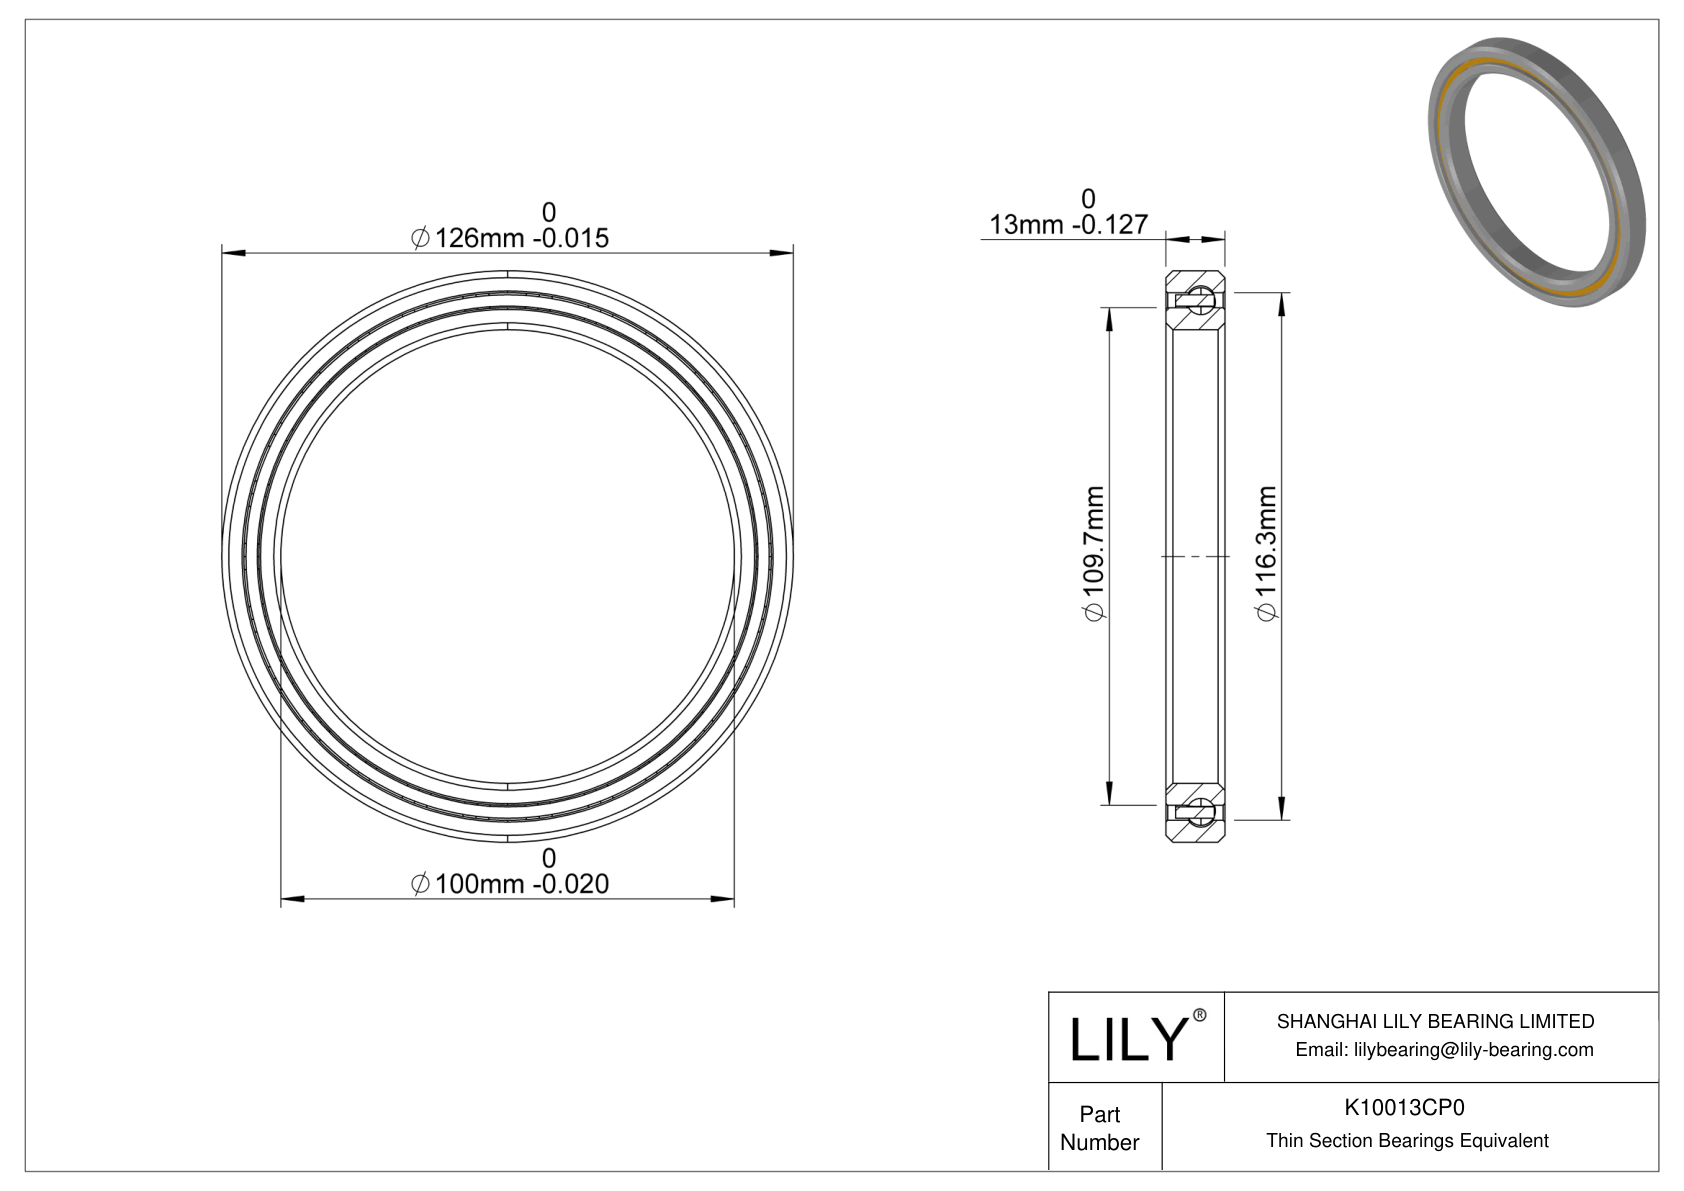 K10013CP0 Constant Section (CS) Bearings cad drawing